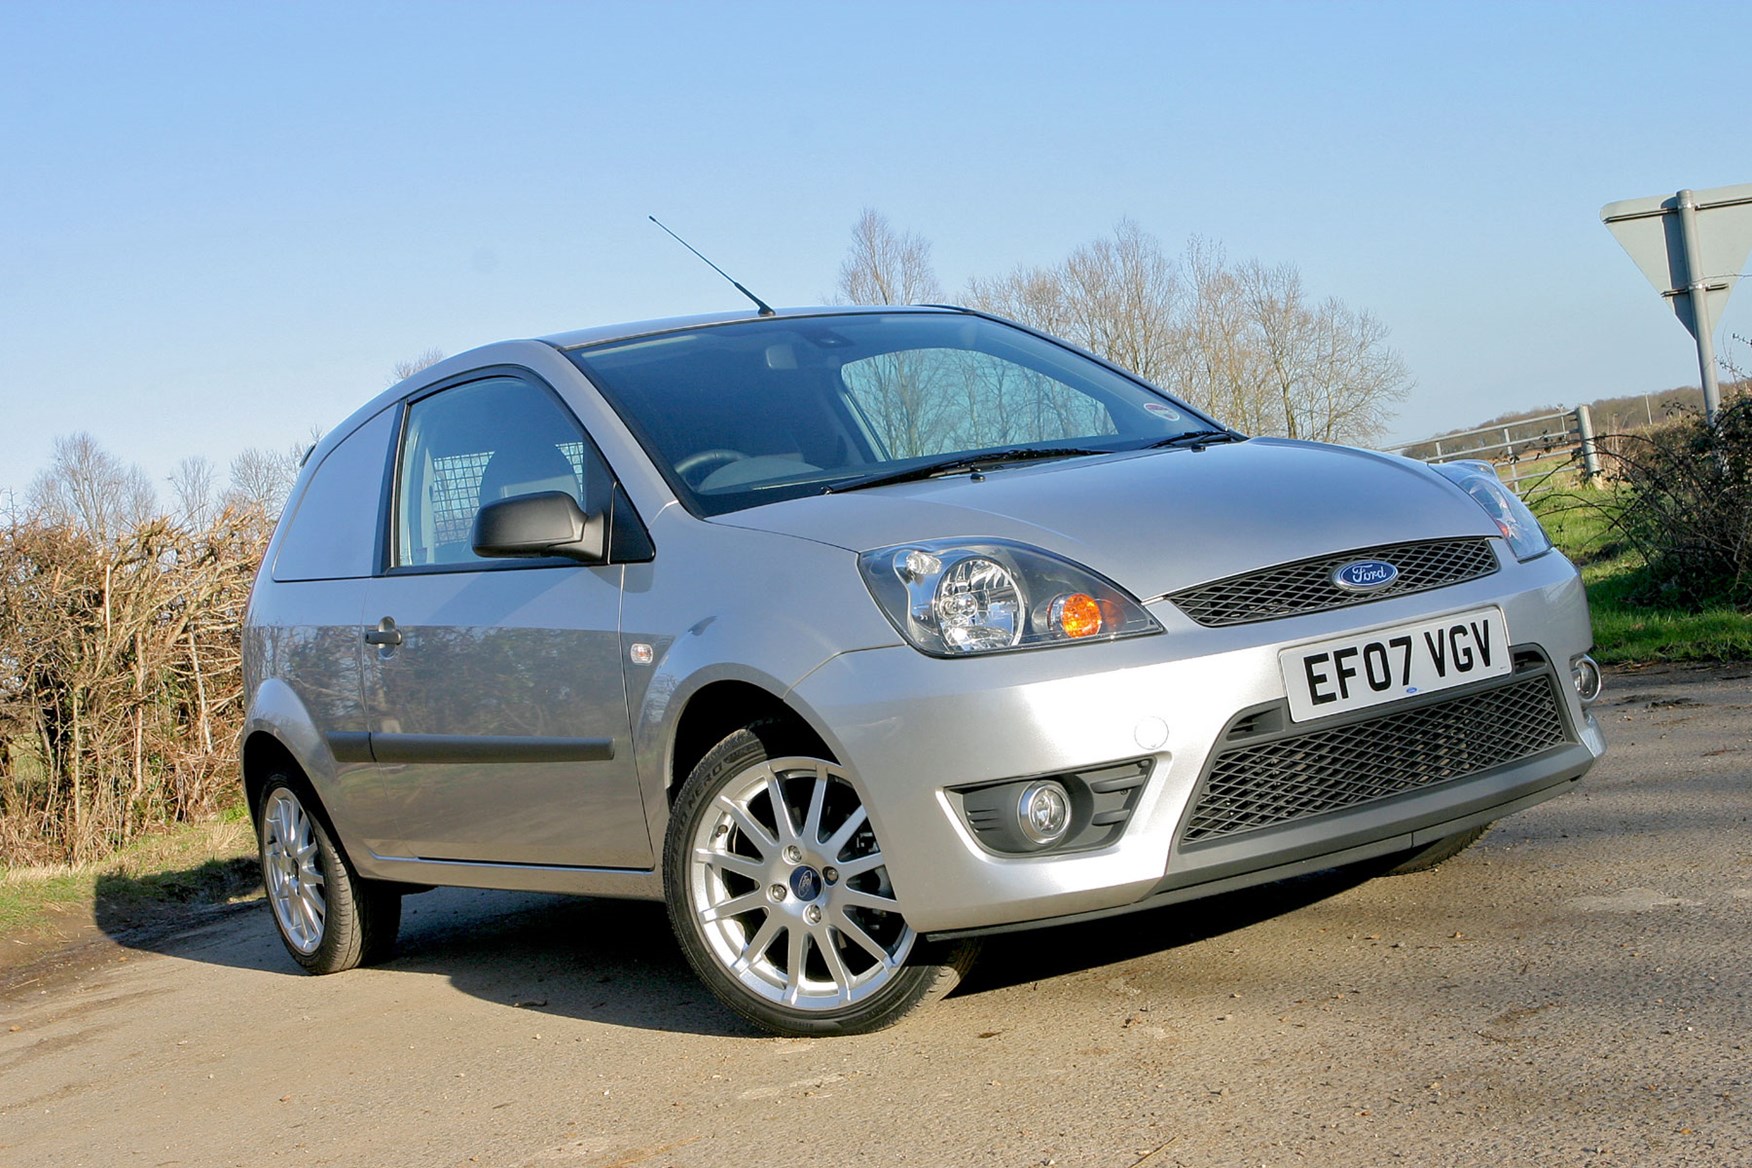 Ford Fiesta Mk6 review - pictures